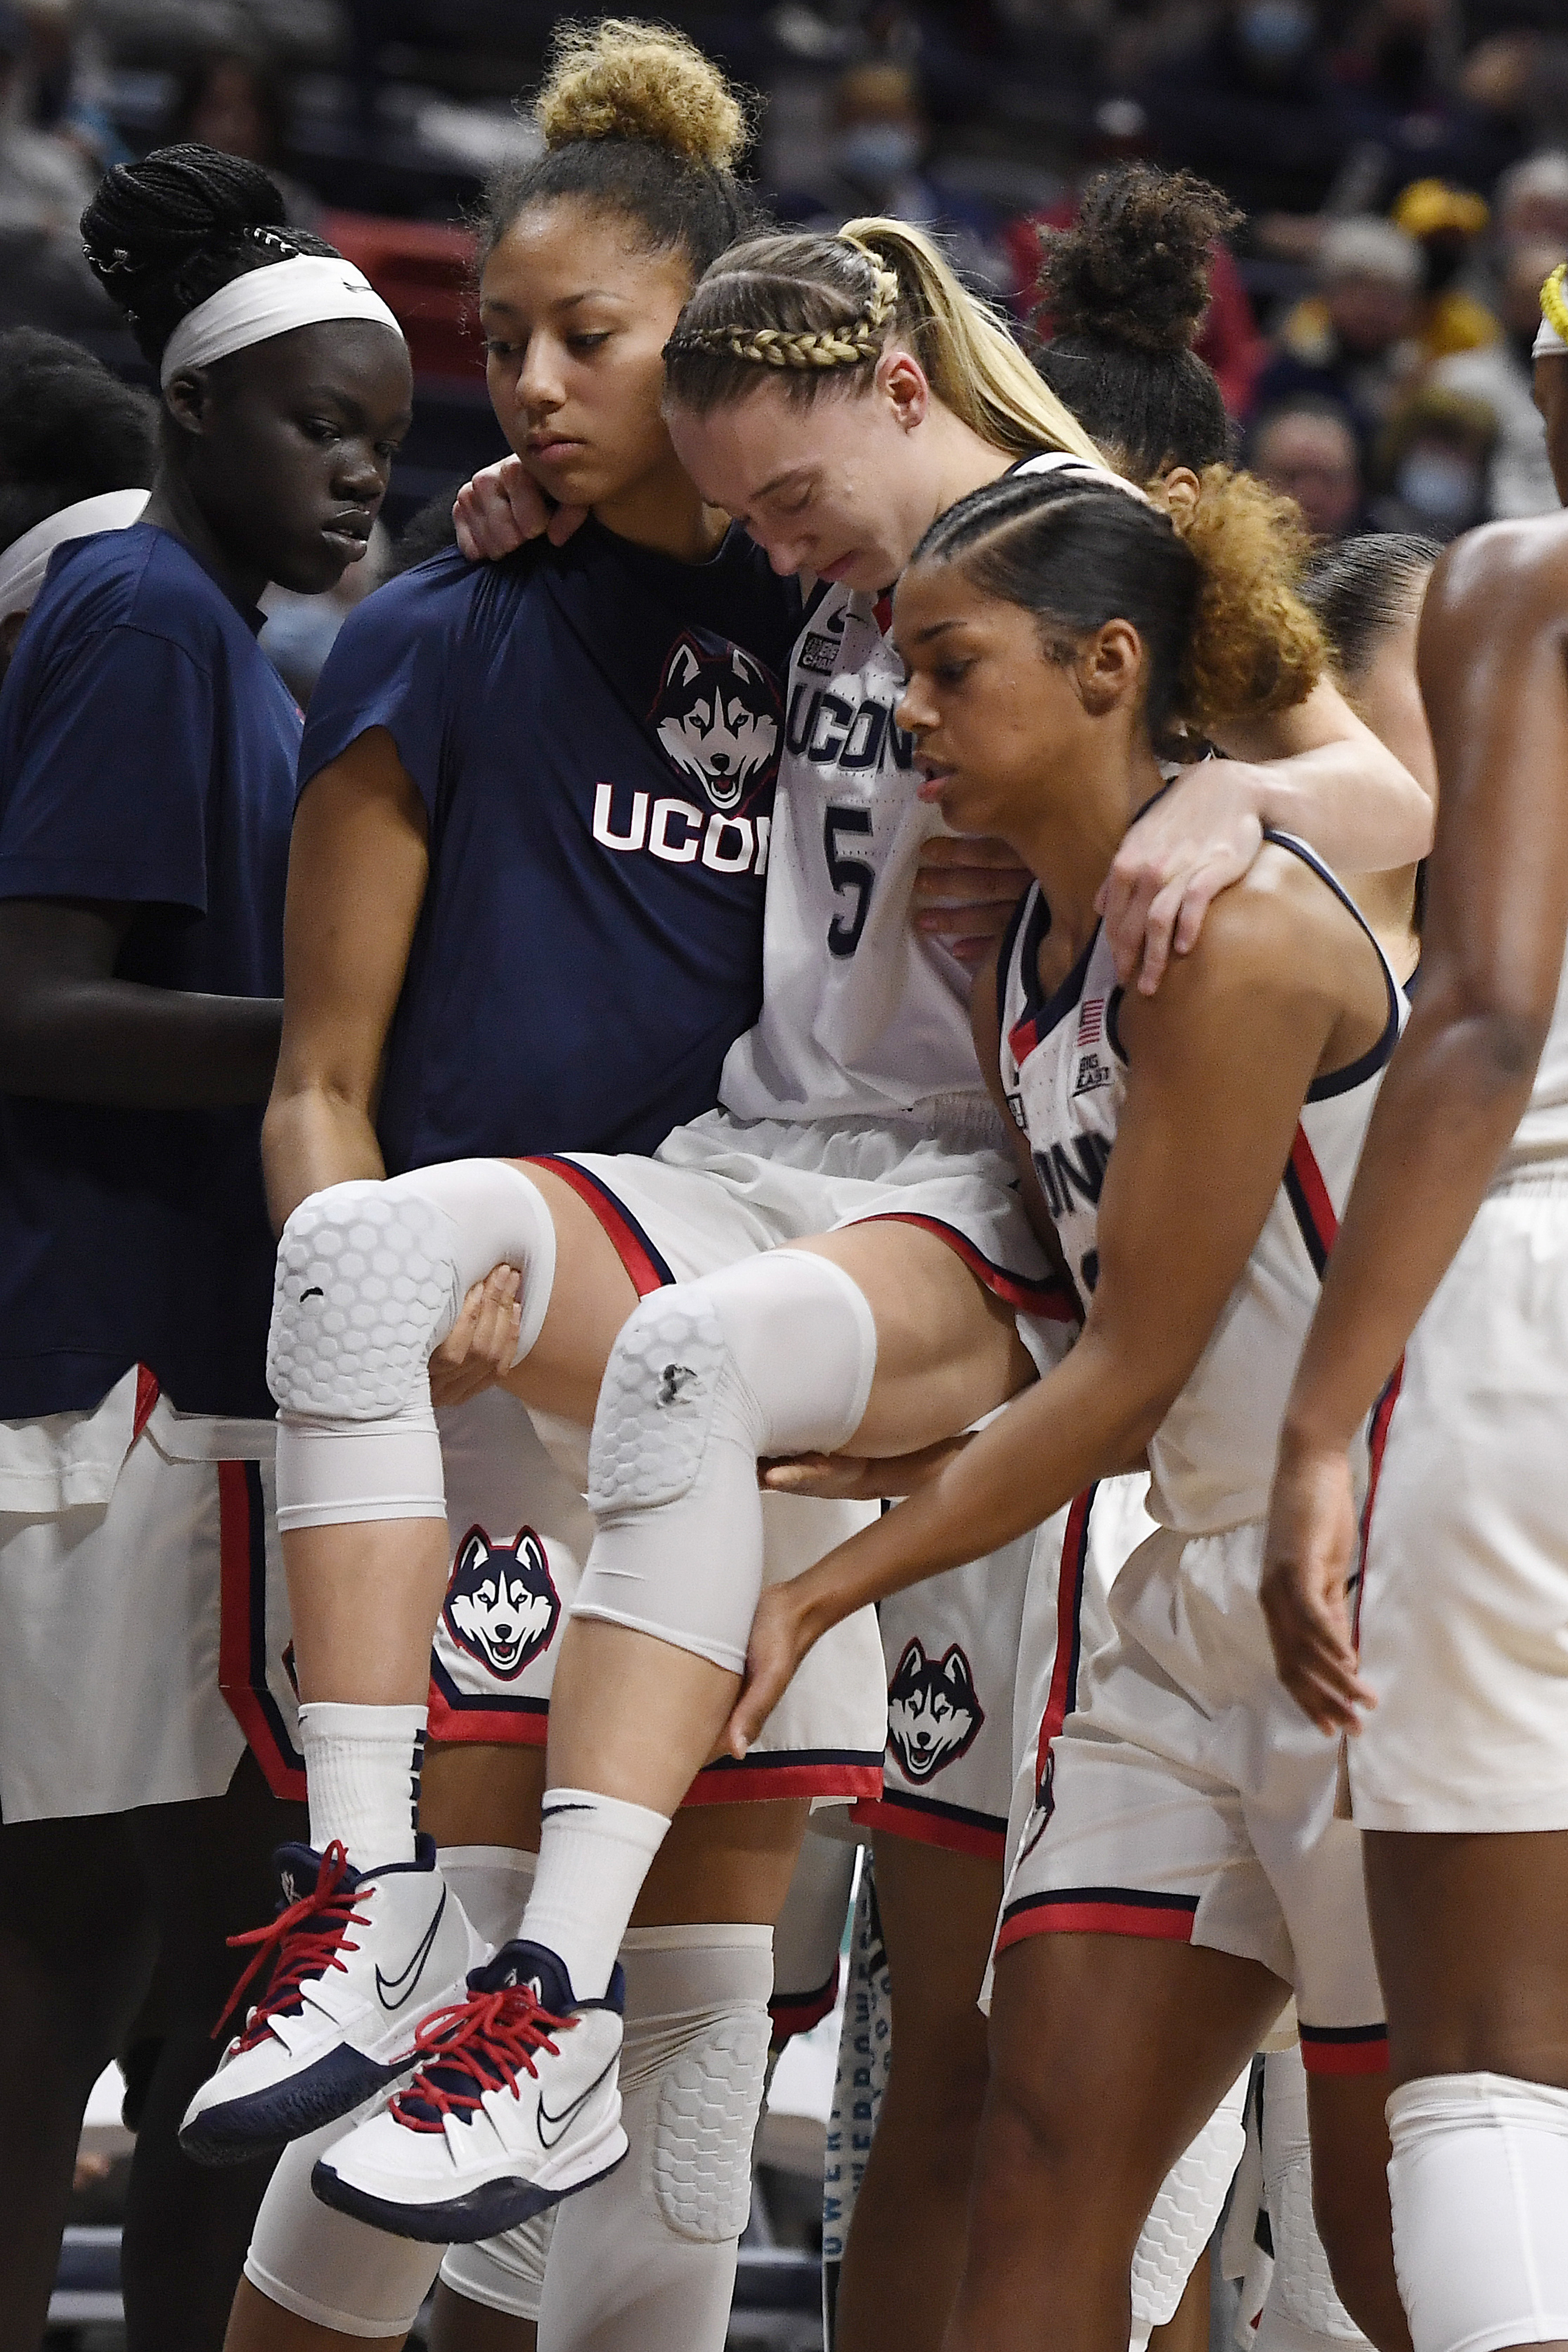 UConn's Paige Bueckers to miss 6-8 weeks with knee injury - The